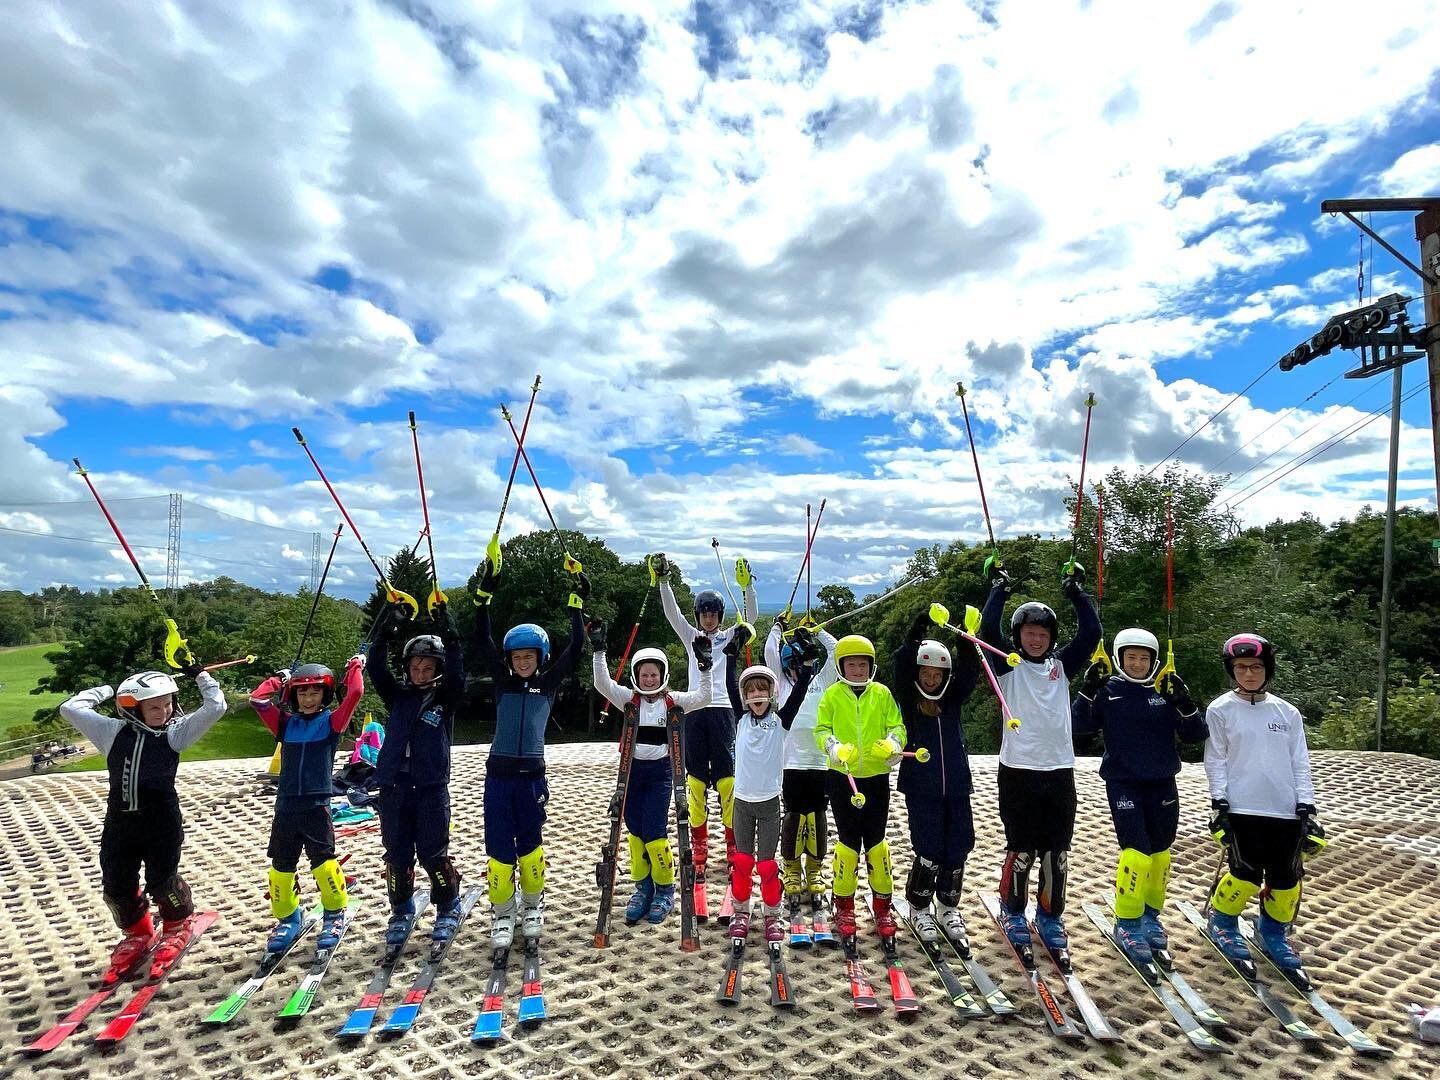 Squad pic from our last camp at Brentwood! ⛷ Upcoming UNIQ Dryslope camps are:

❄️ Chatham | 26-28 July
❄️ Welwyn | 02-05 August 
❄️ Pendle | 09-13 August 

Limited spaces remaining! For more information, please visit - www.uniqsnowsports.com/dryslop